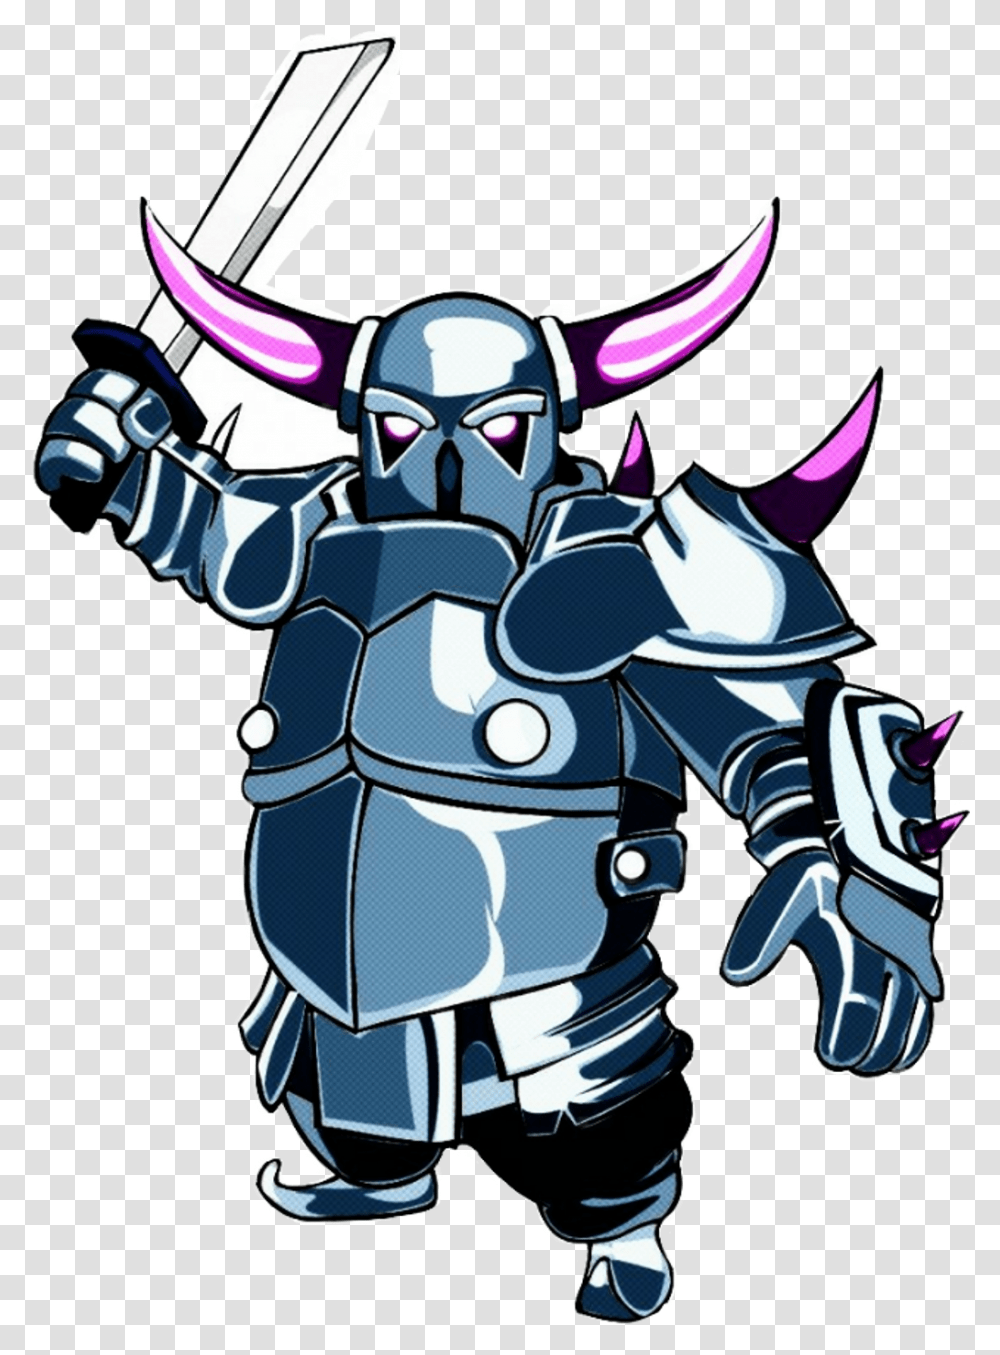 Clash Royale Stickers Clash Royale, Knight, Armor Transparent Png